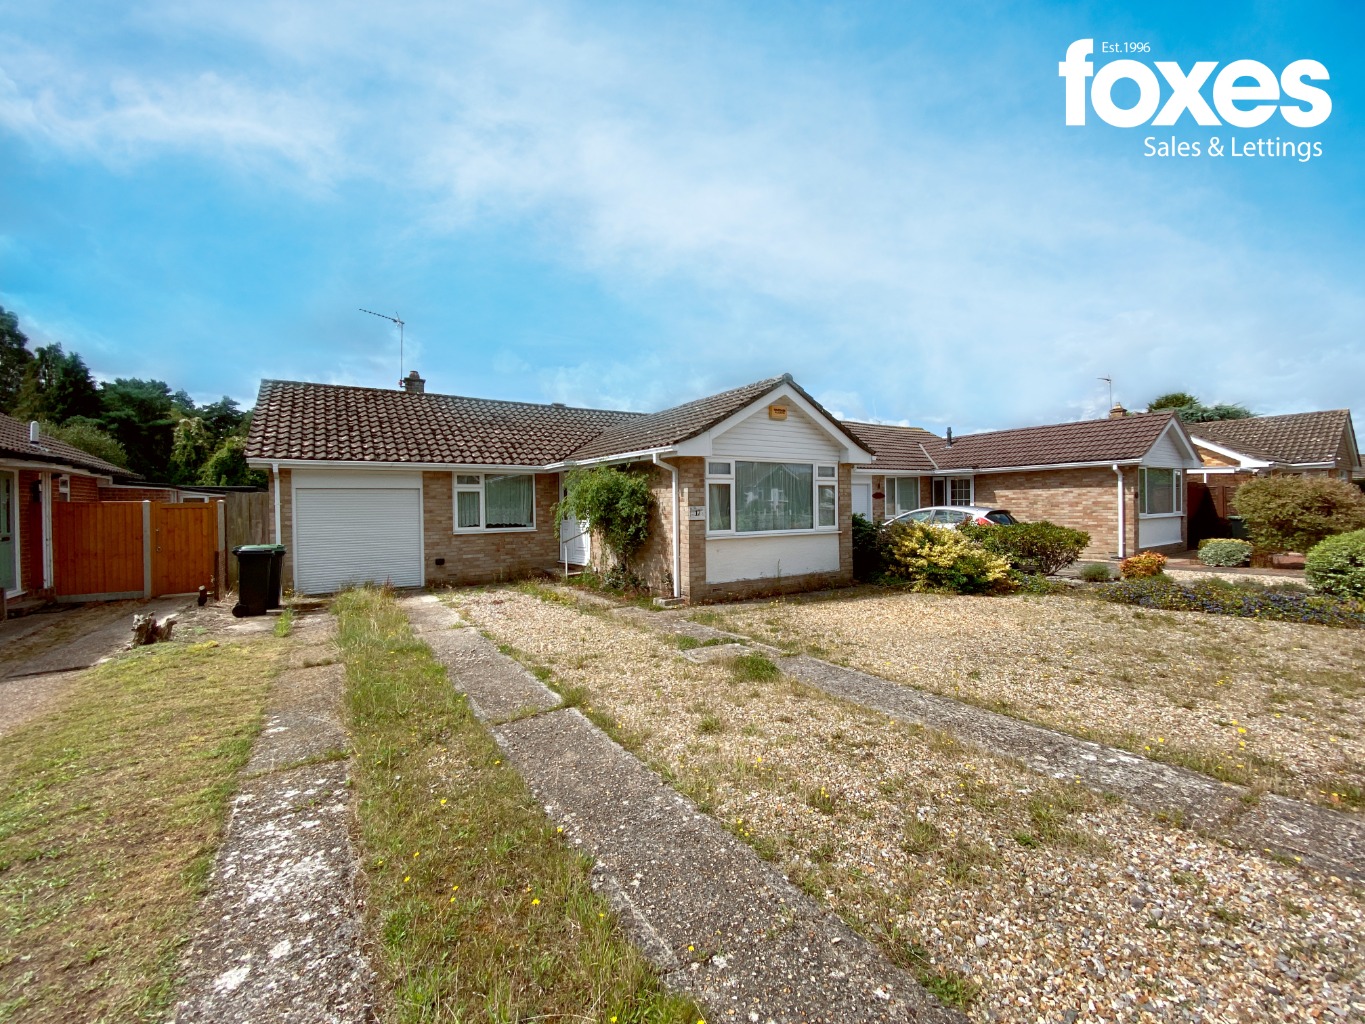 2 bed detached bungalow for sale in Southern Avenue, Ferndown - Property Image 1